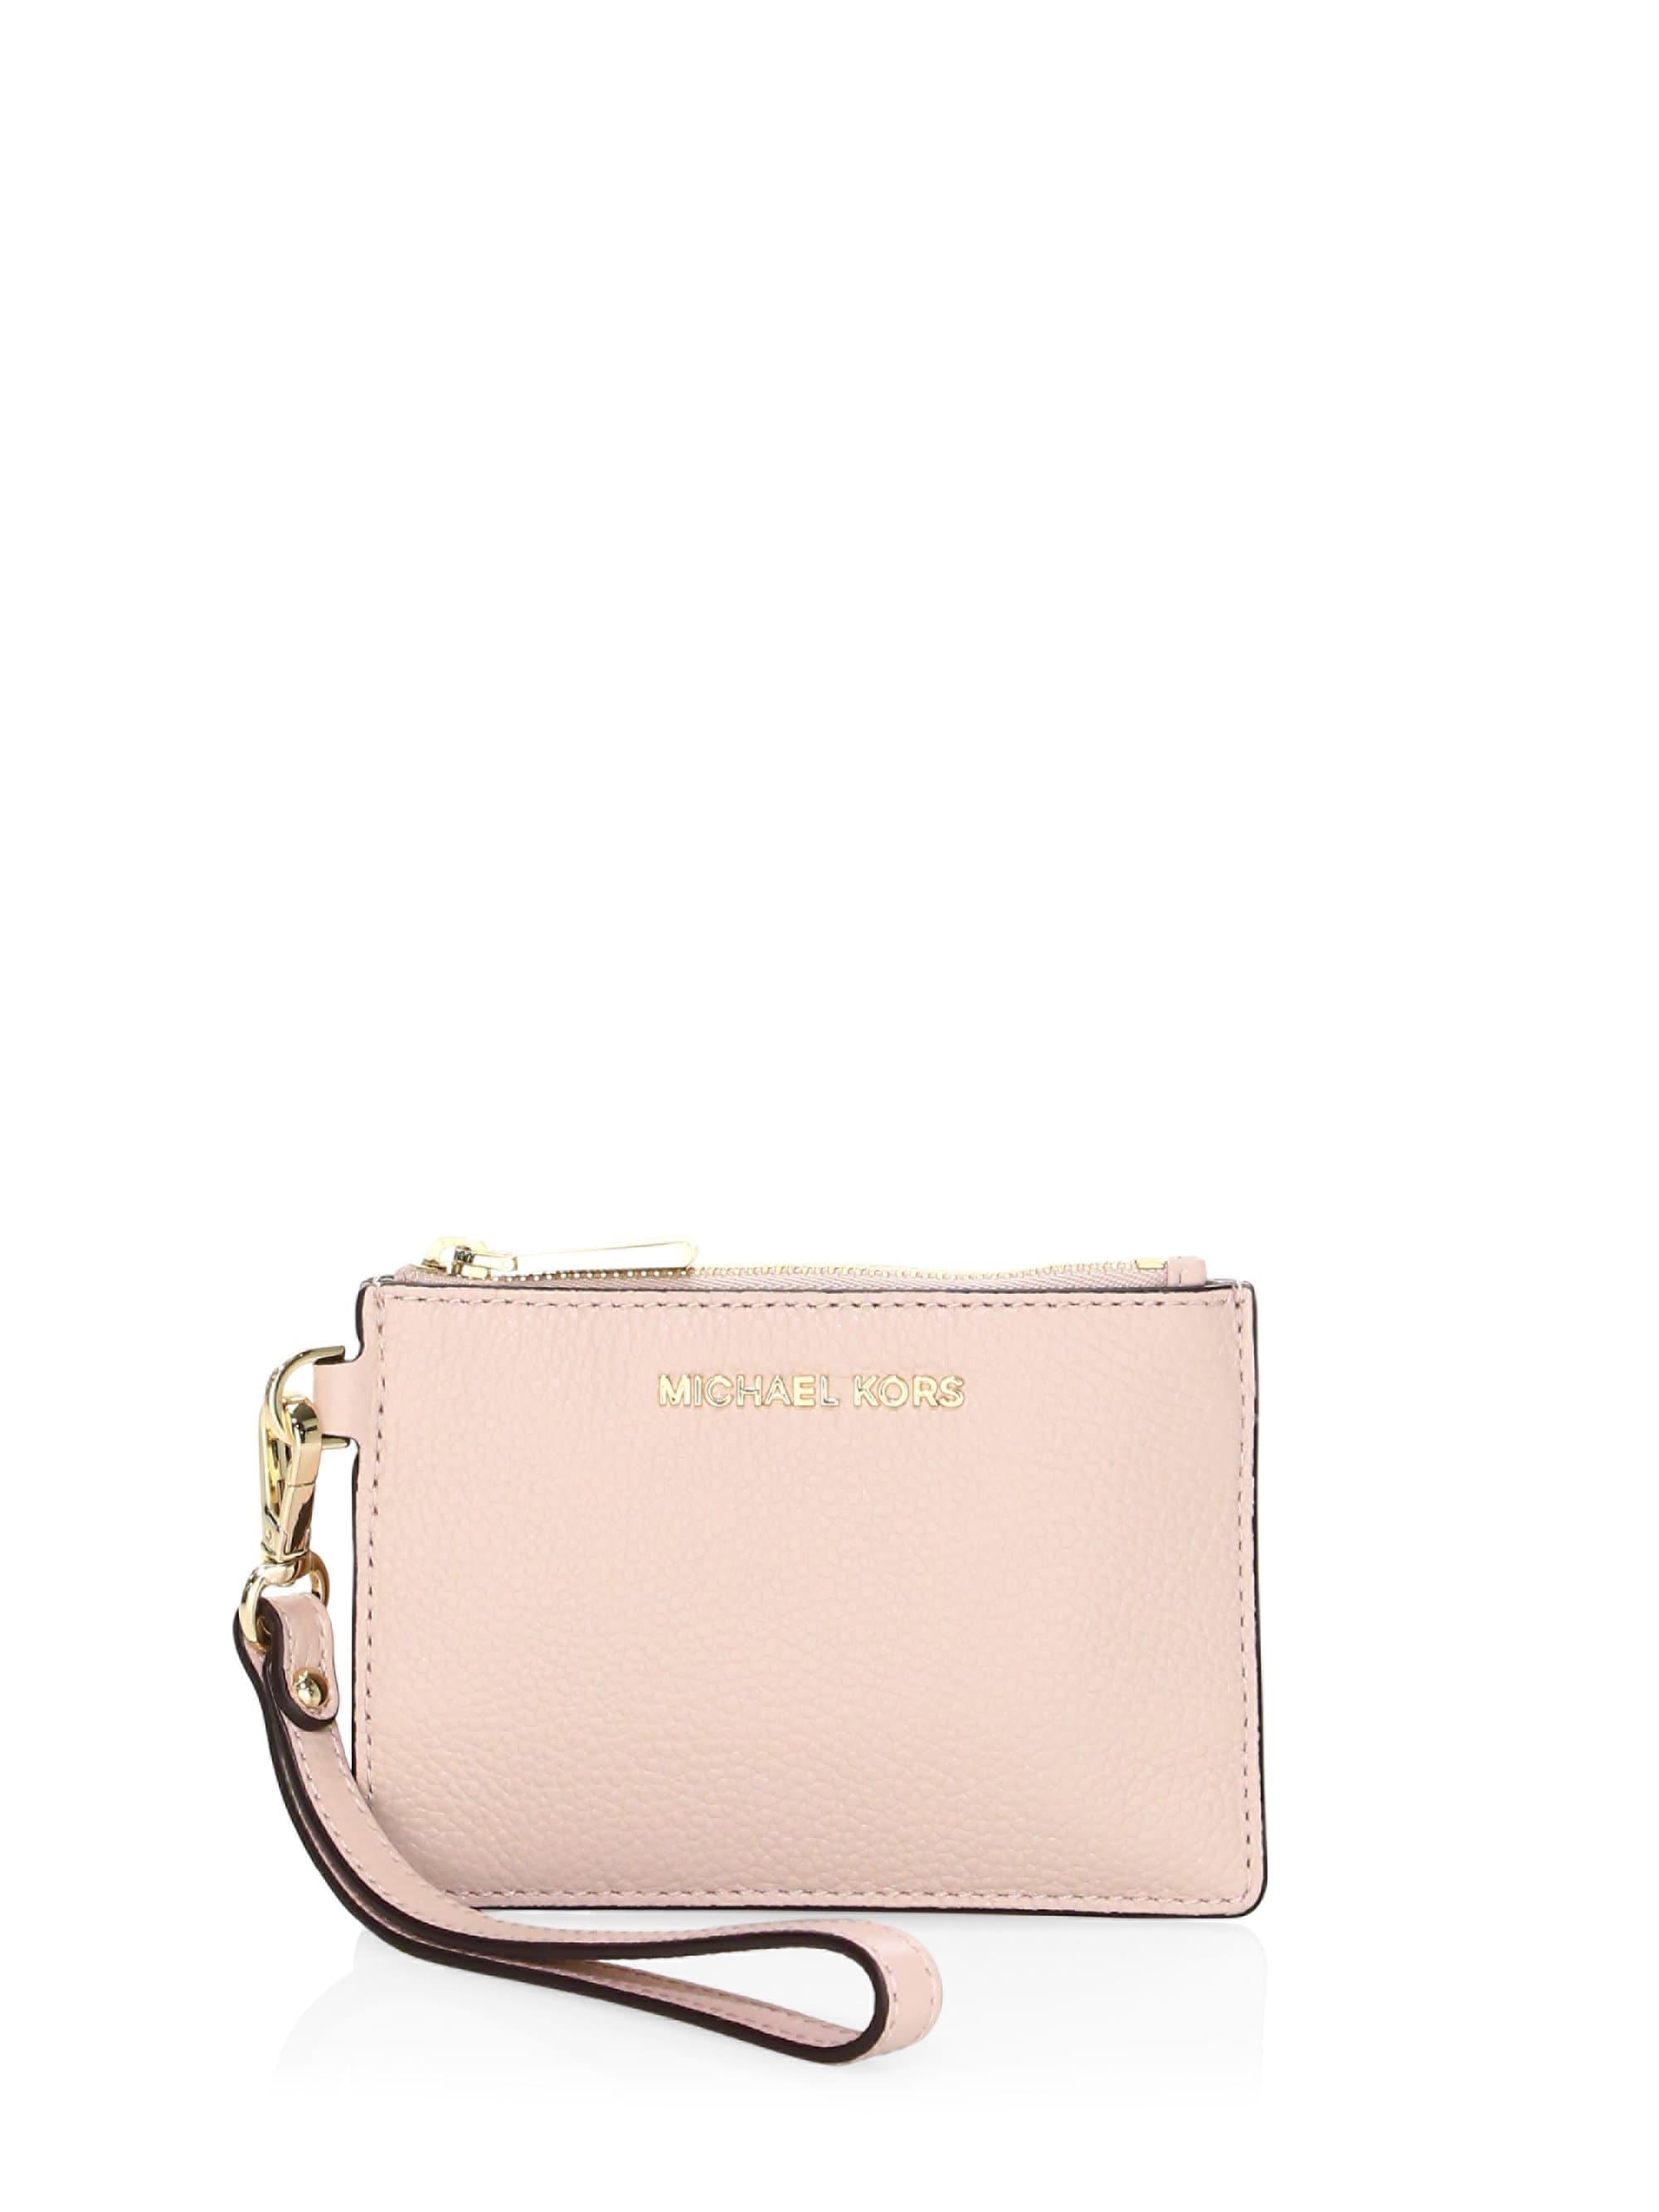 MICHAEL Michael Kors Small Money Pieces Leather Coin Purse in Pink - Lyst